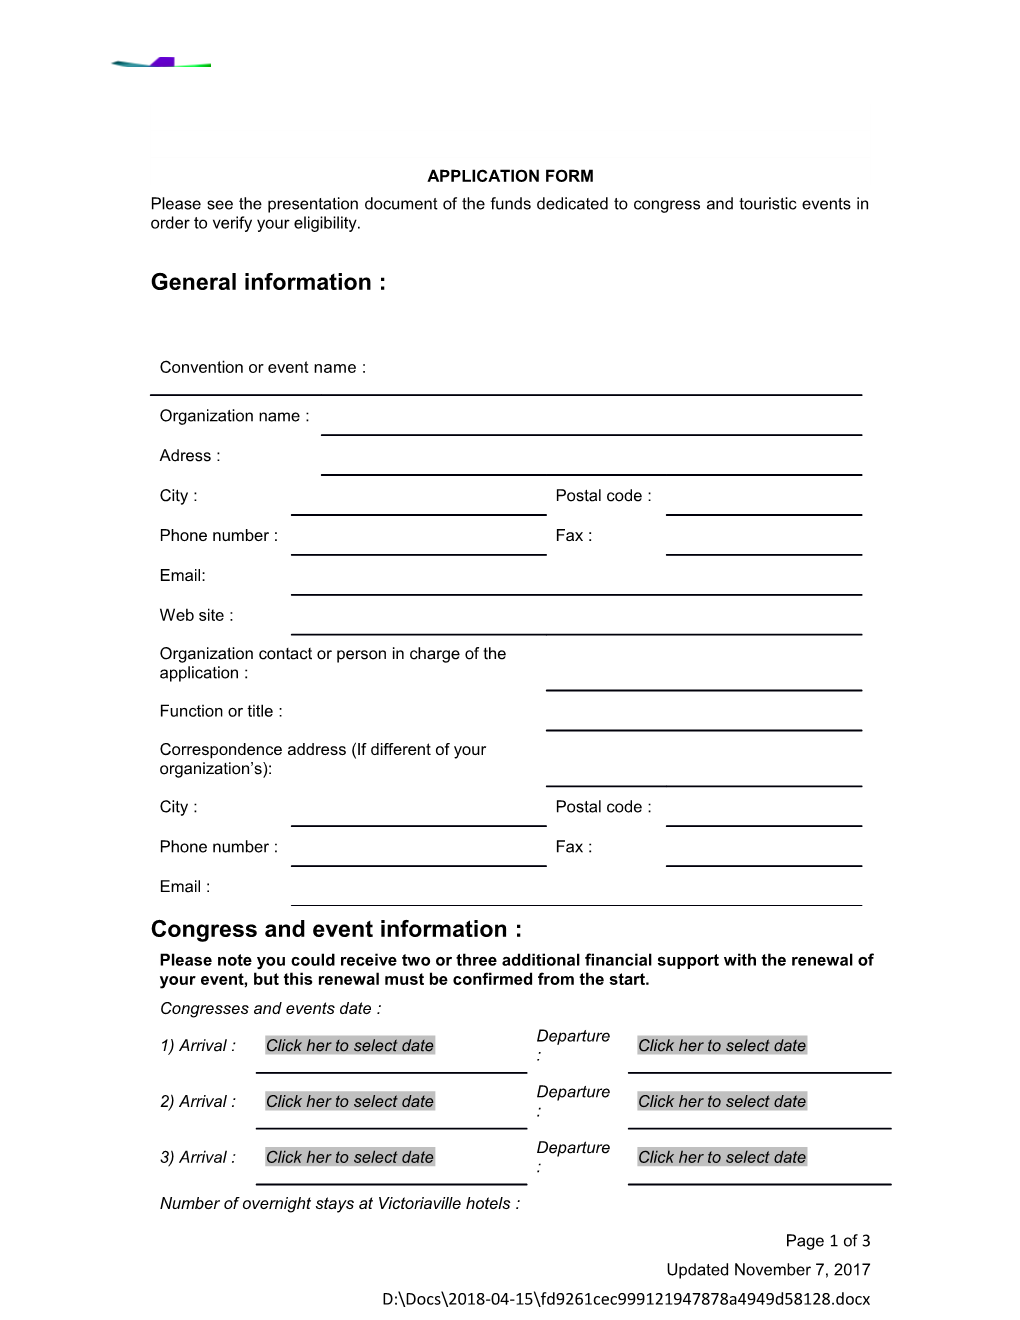 Application Form s28